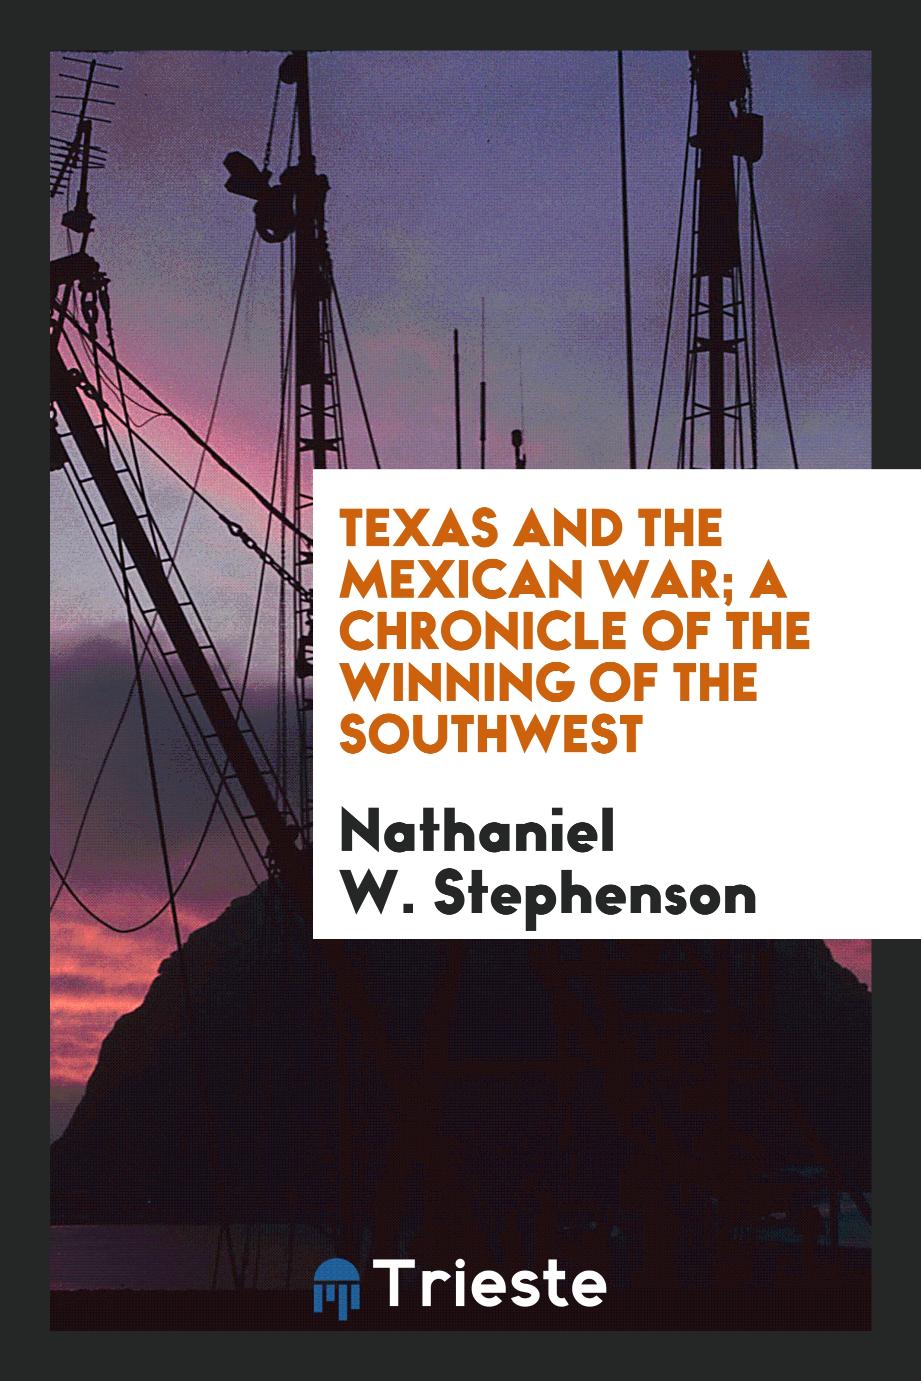 Texas and the Mexican war; a chronicle of the winning of the Southwest